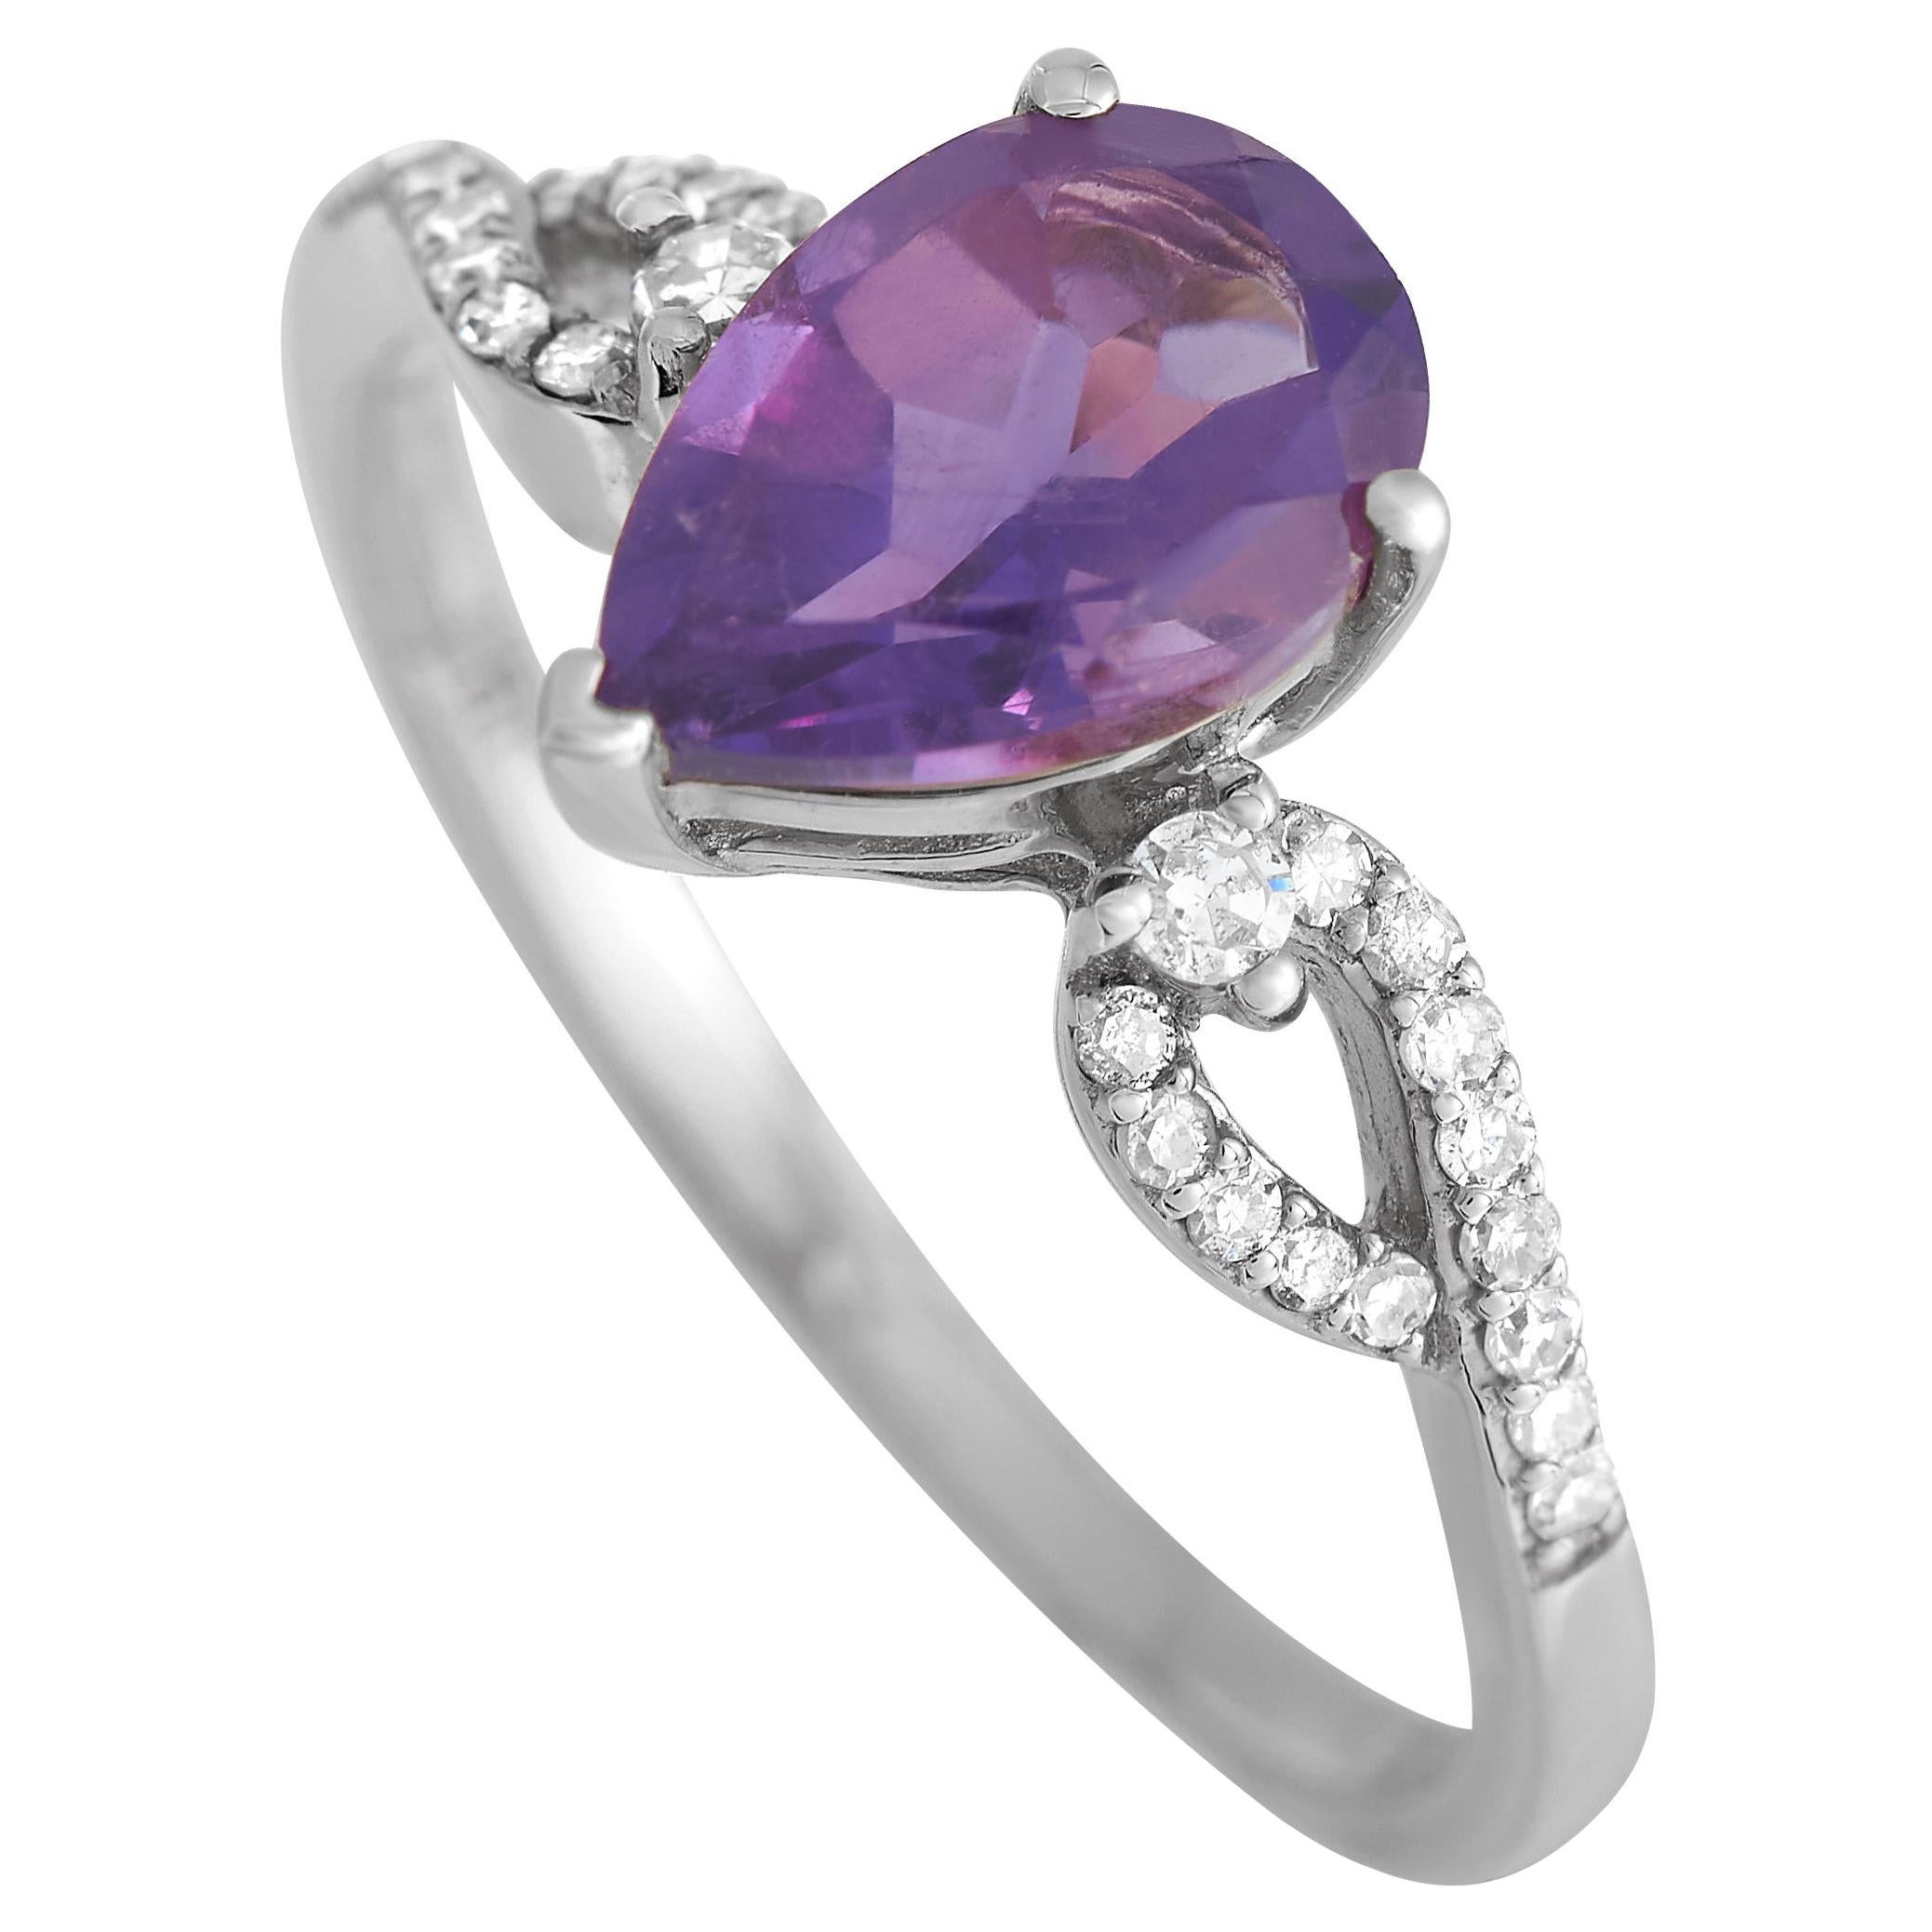 14K White Gold 0.15ct Diamond and Amethyst Ring